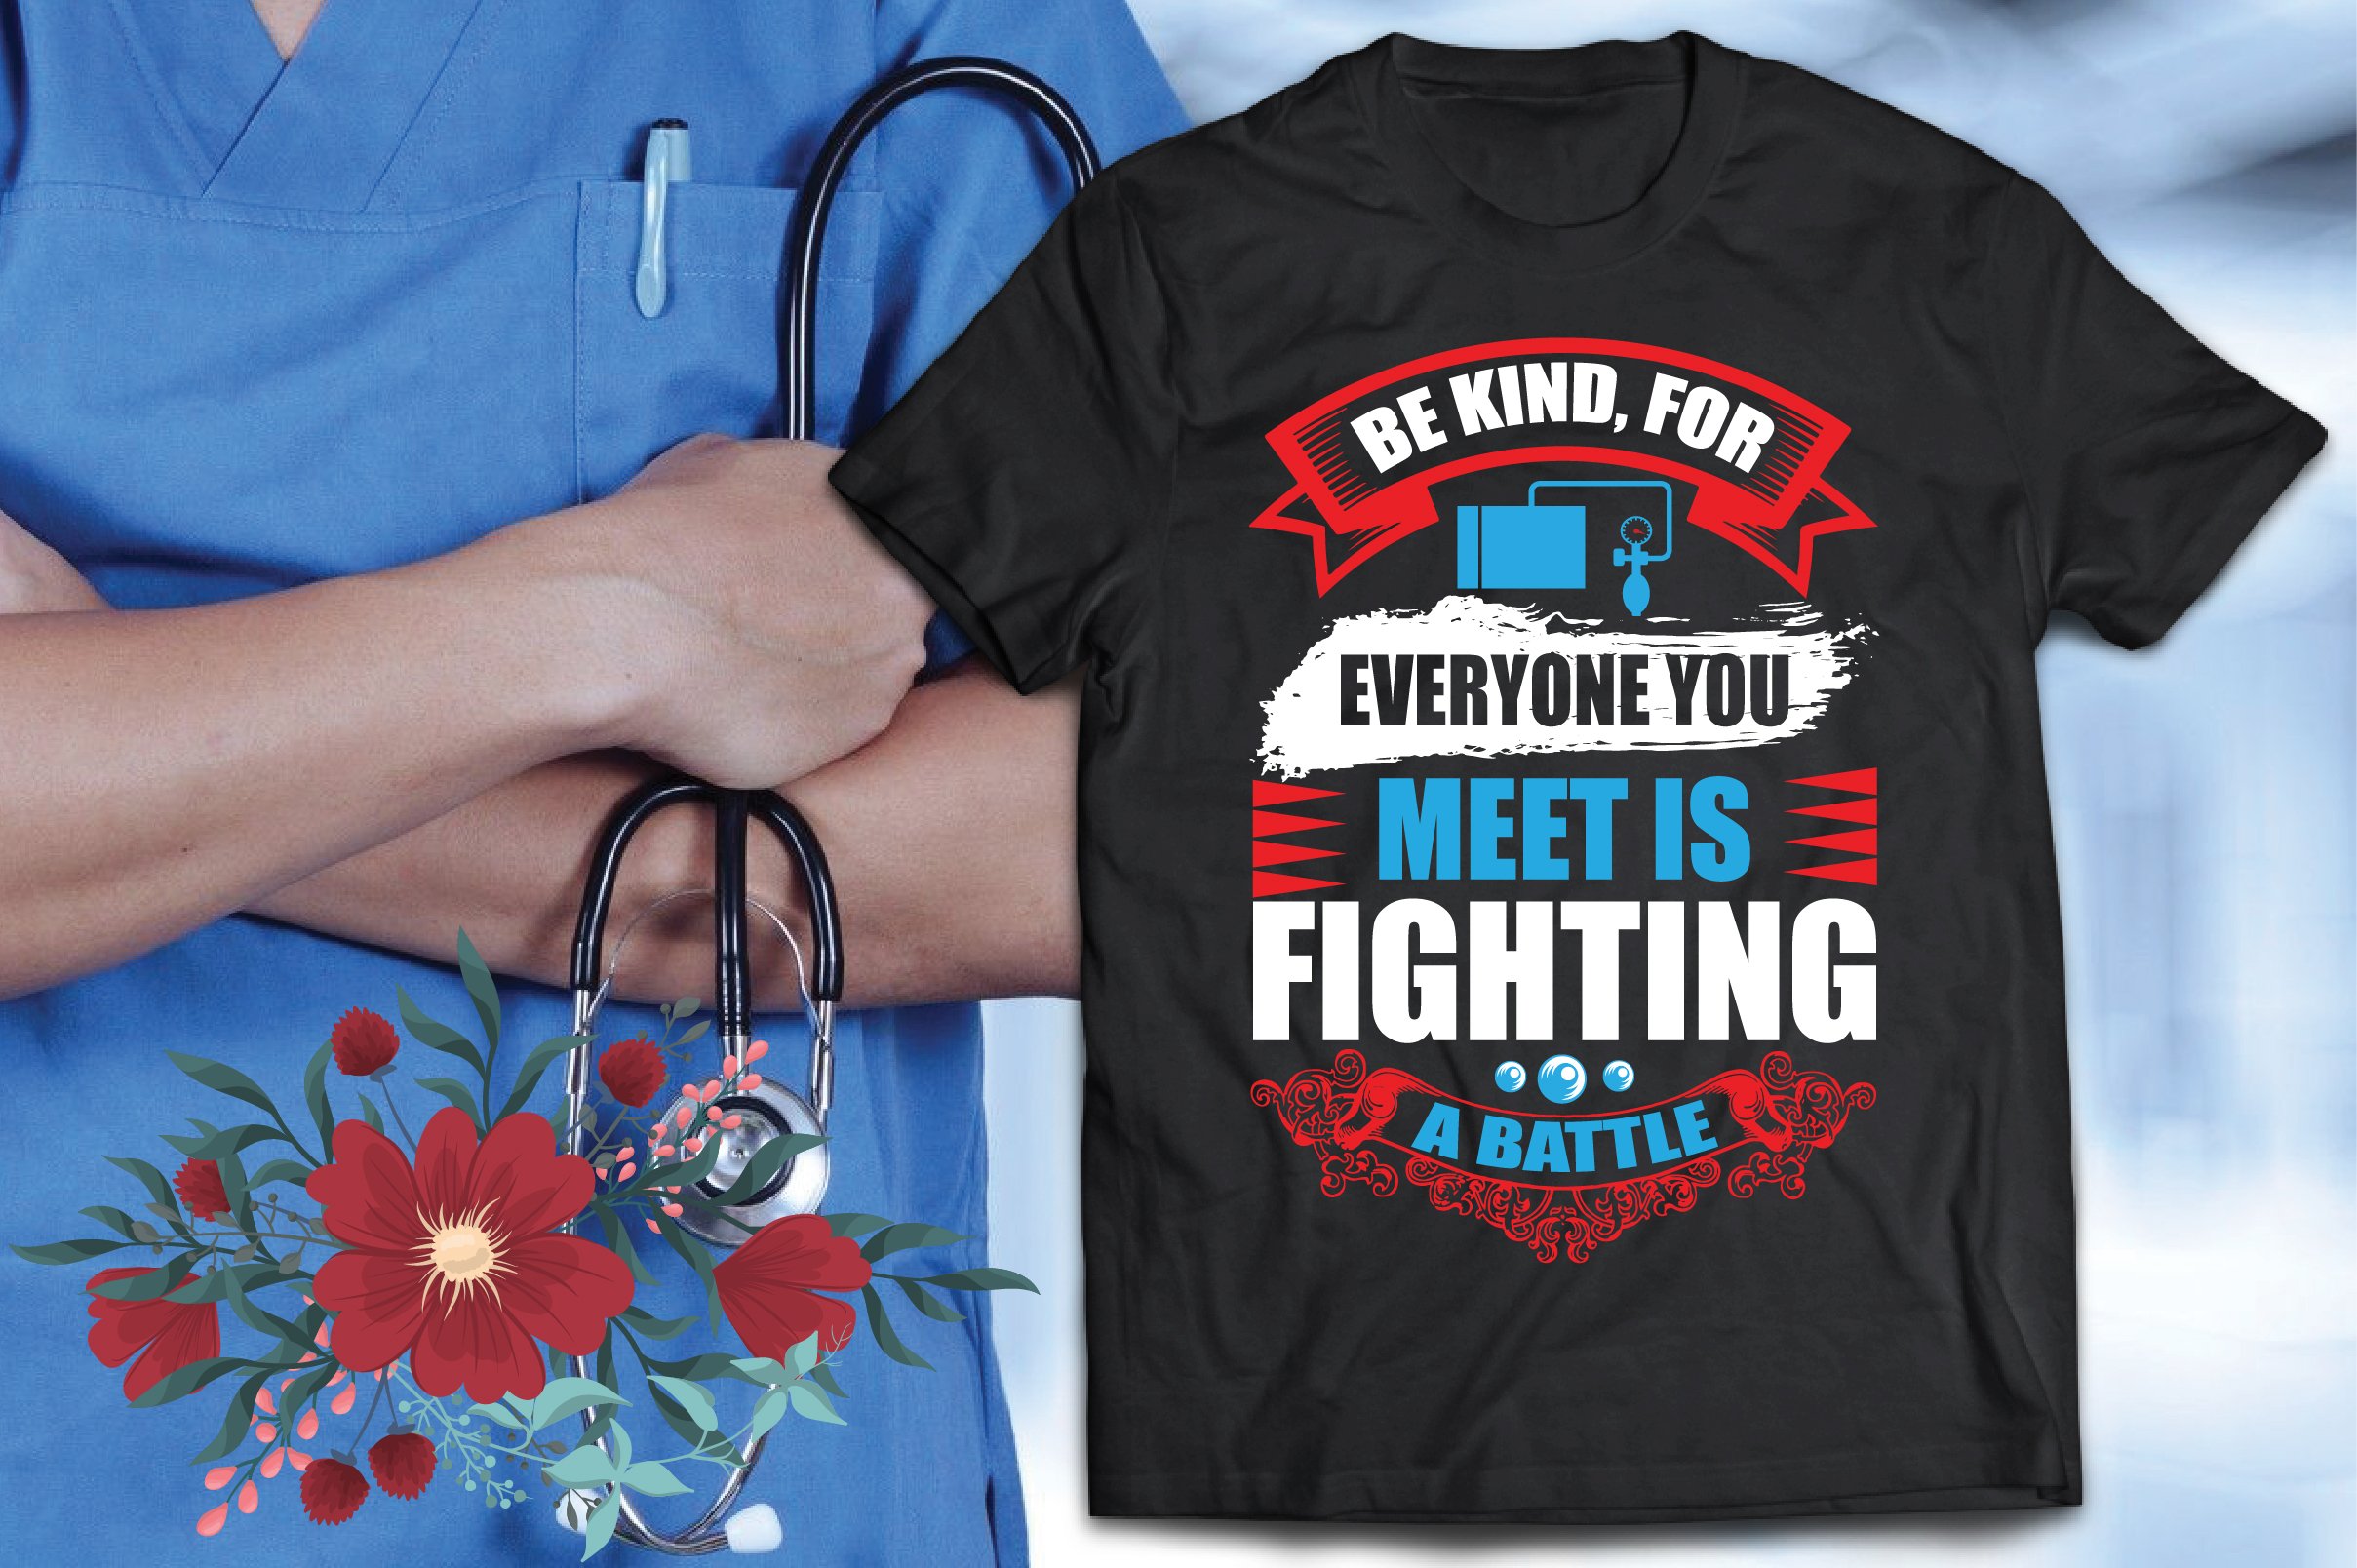 Nurse illustration in red, blue and white colors on the dark t-shirt.